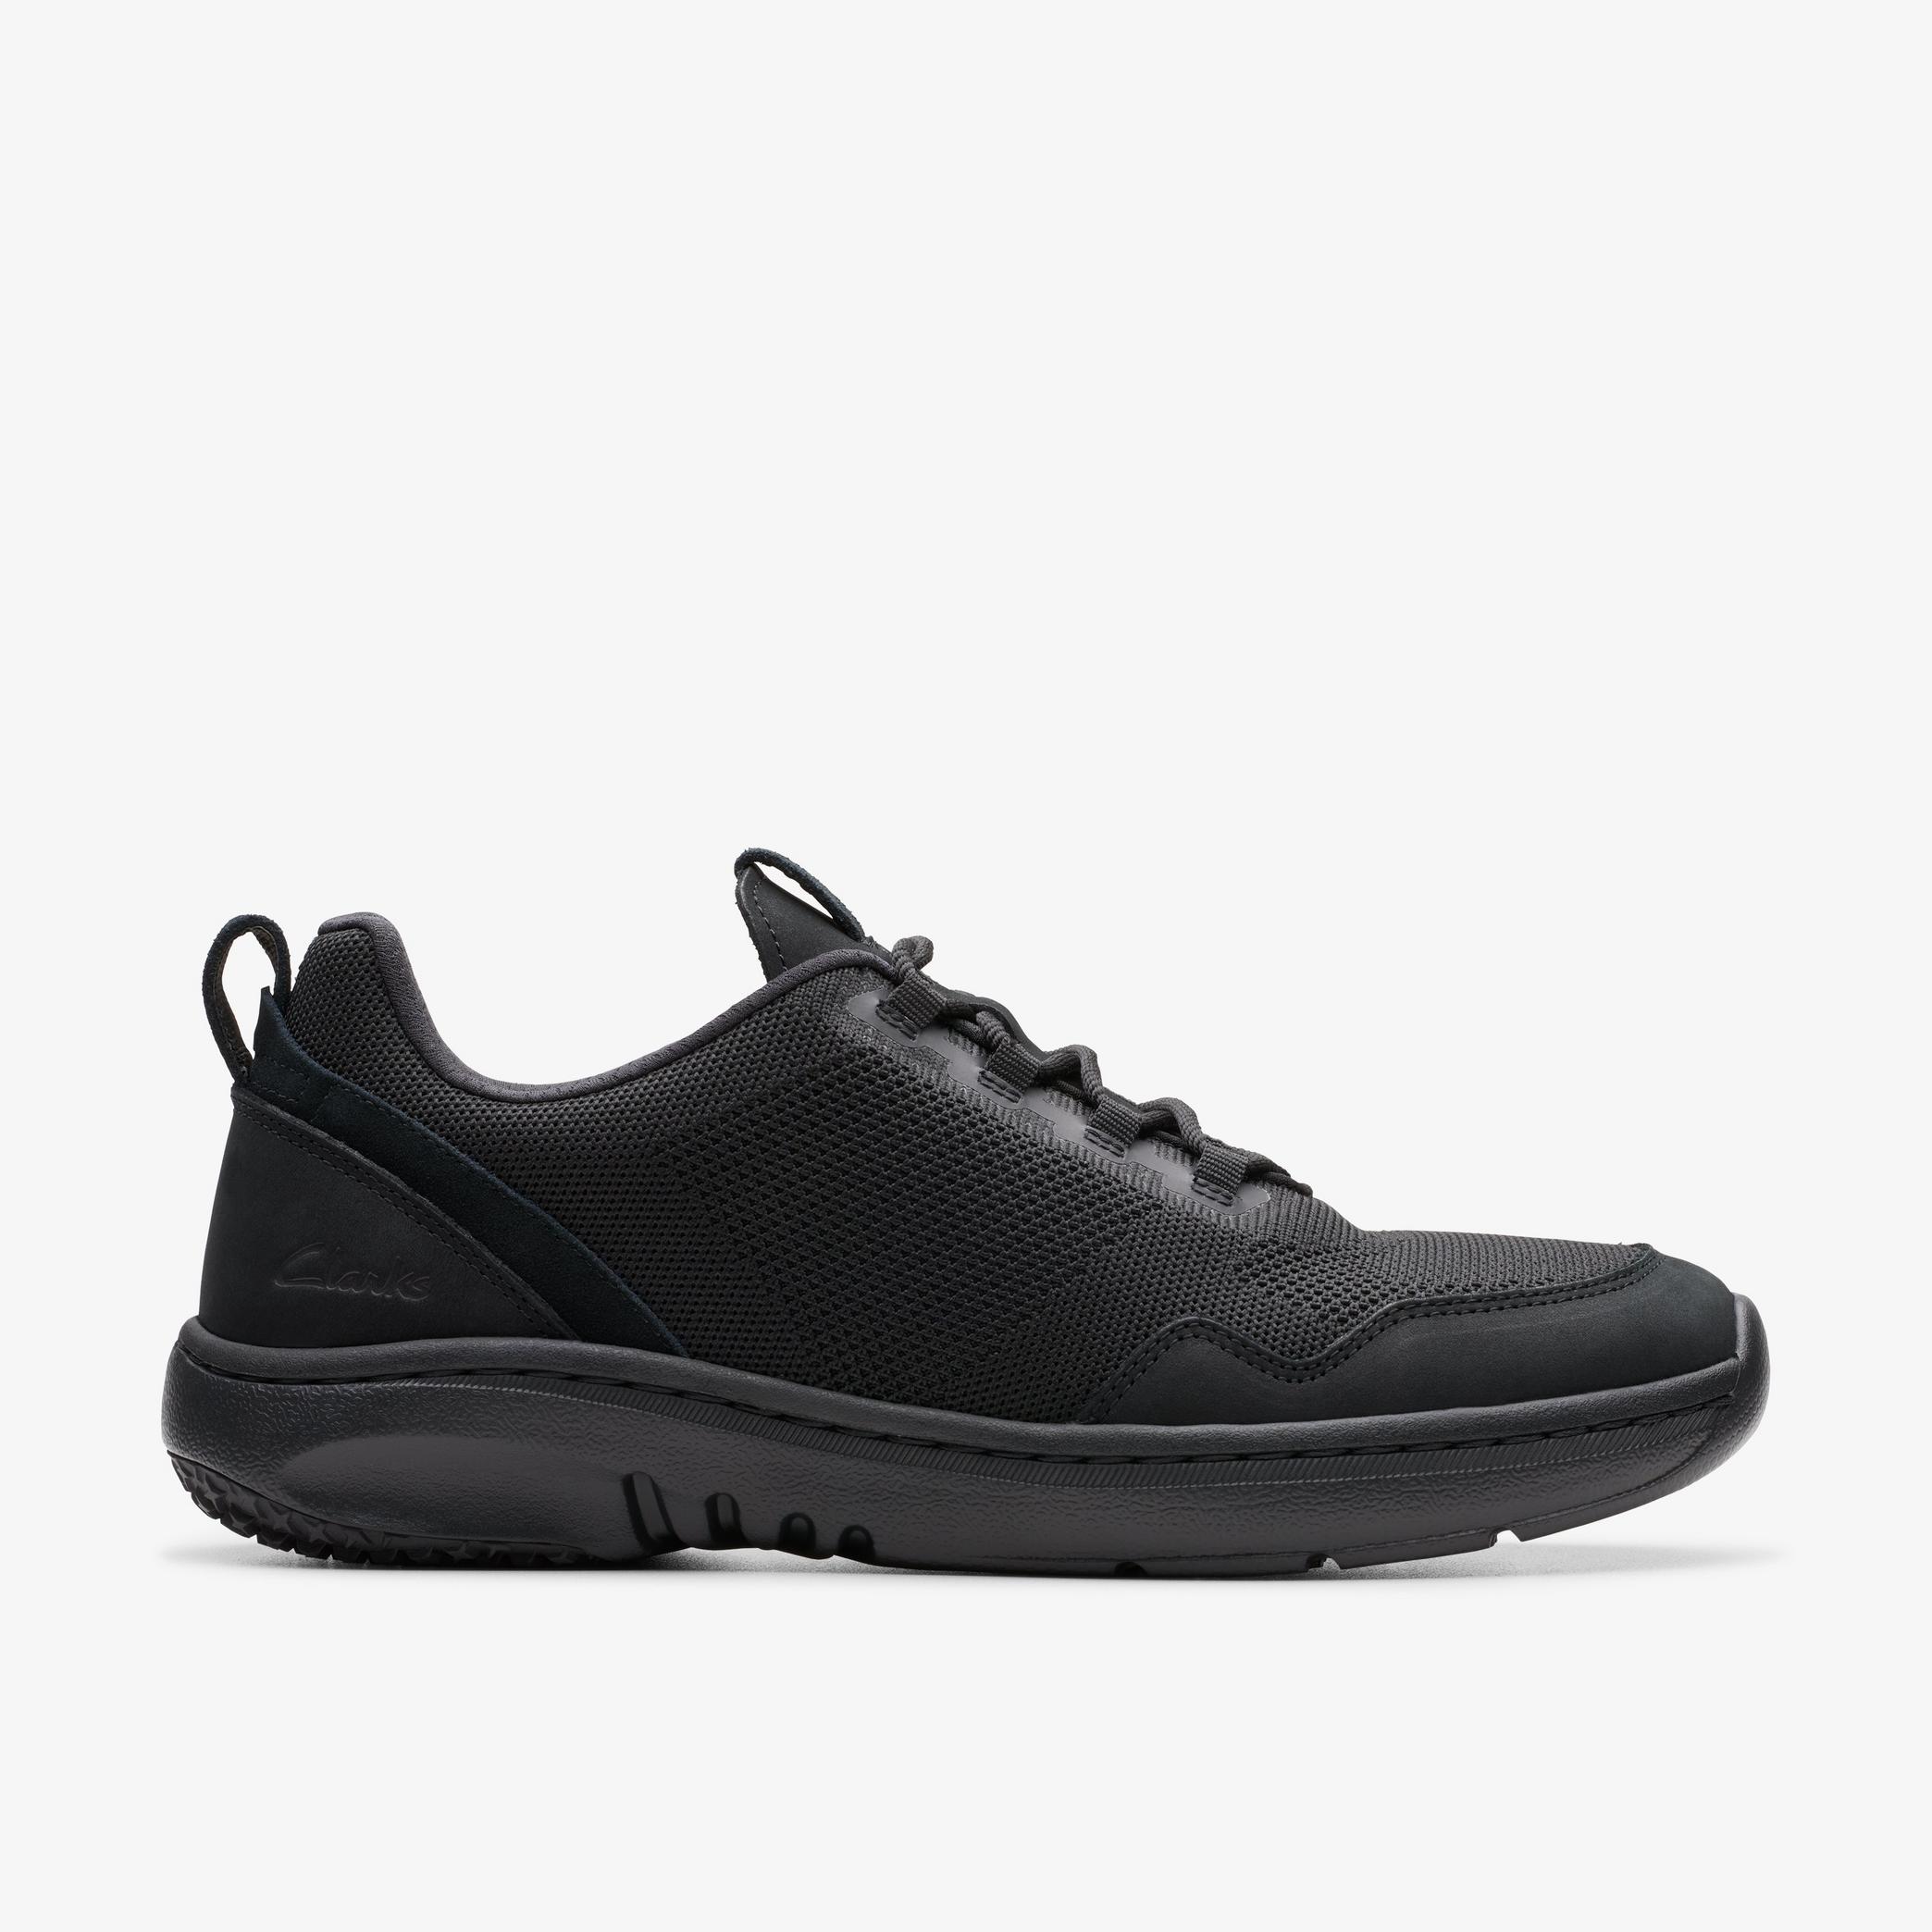 Clarks Pro Knit Black Shoes, view 1 of 6